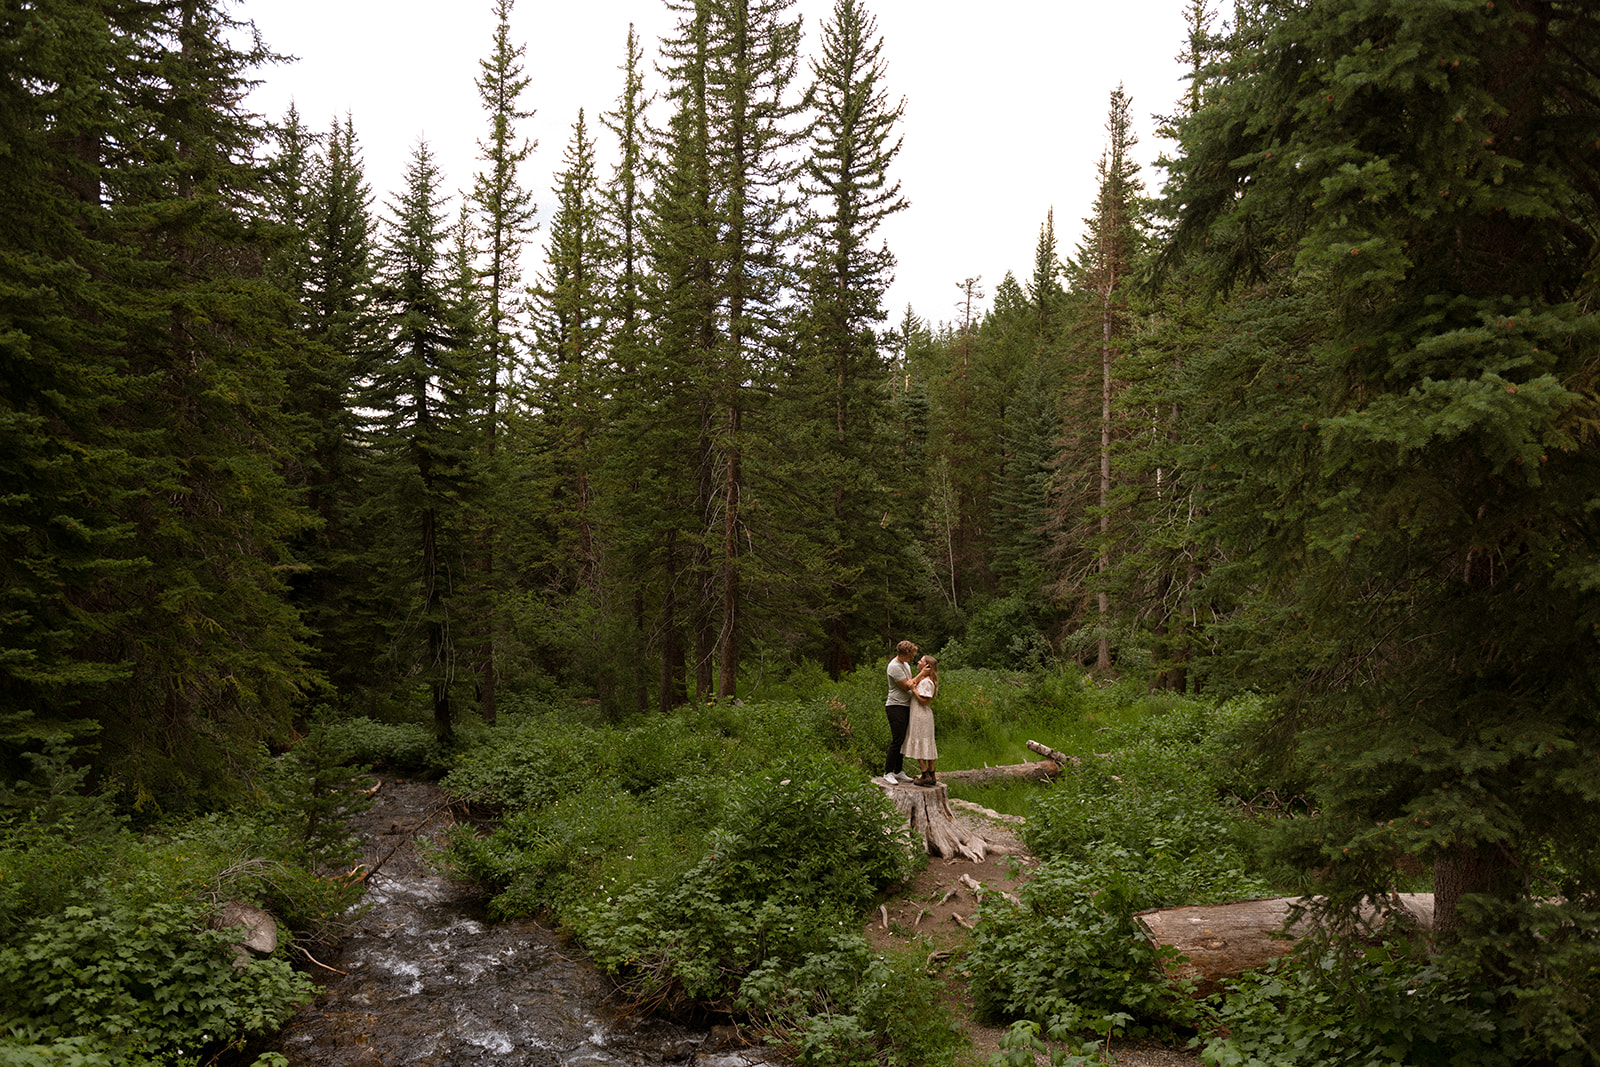 Magical and romantic evening in the Utah mountains, surrounded by lush greens